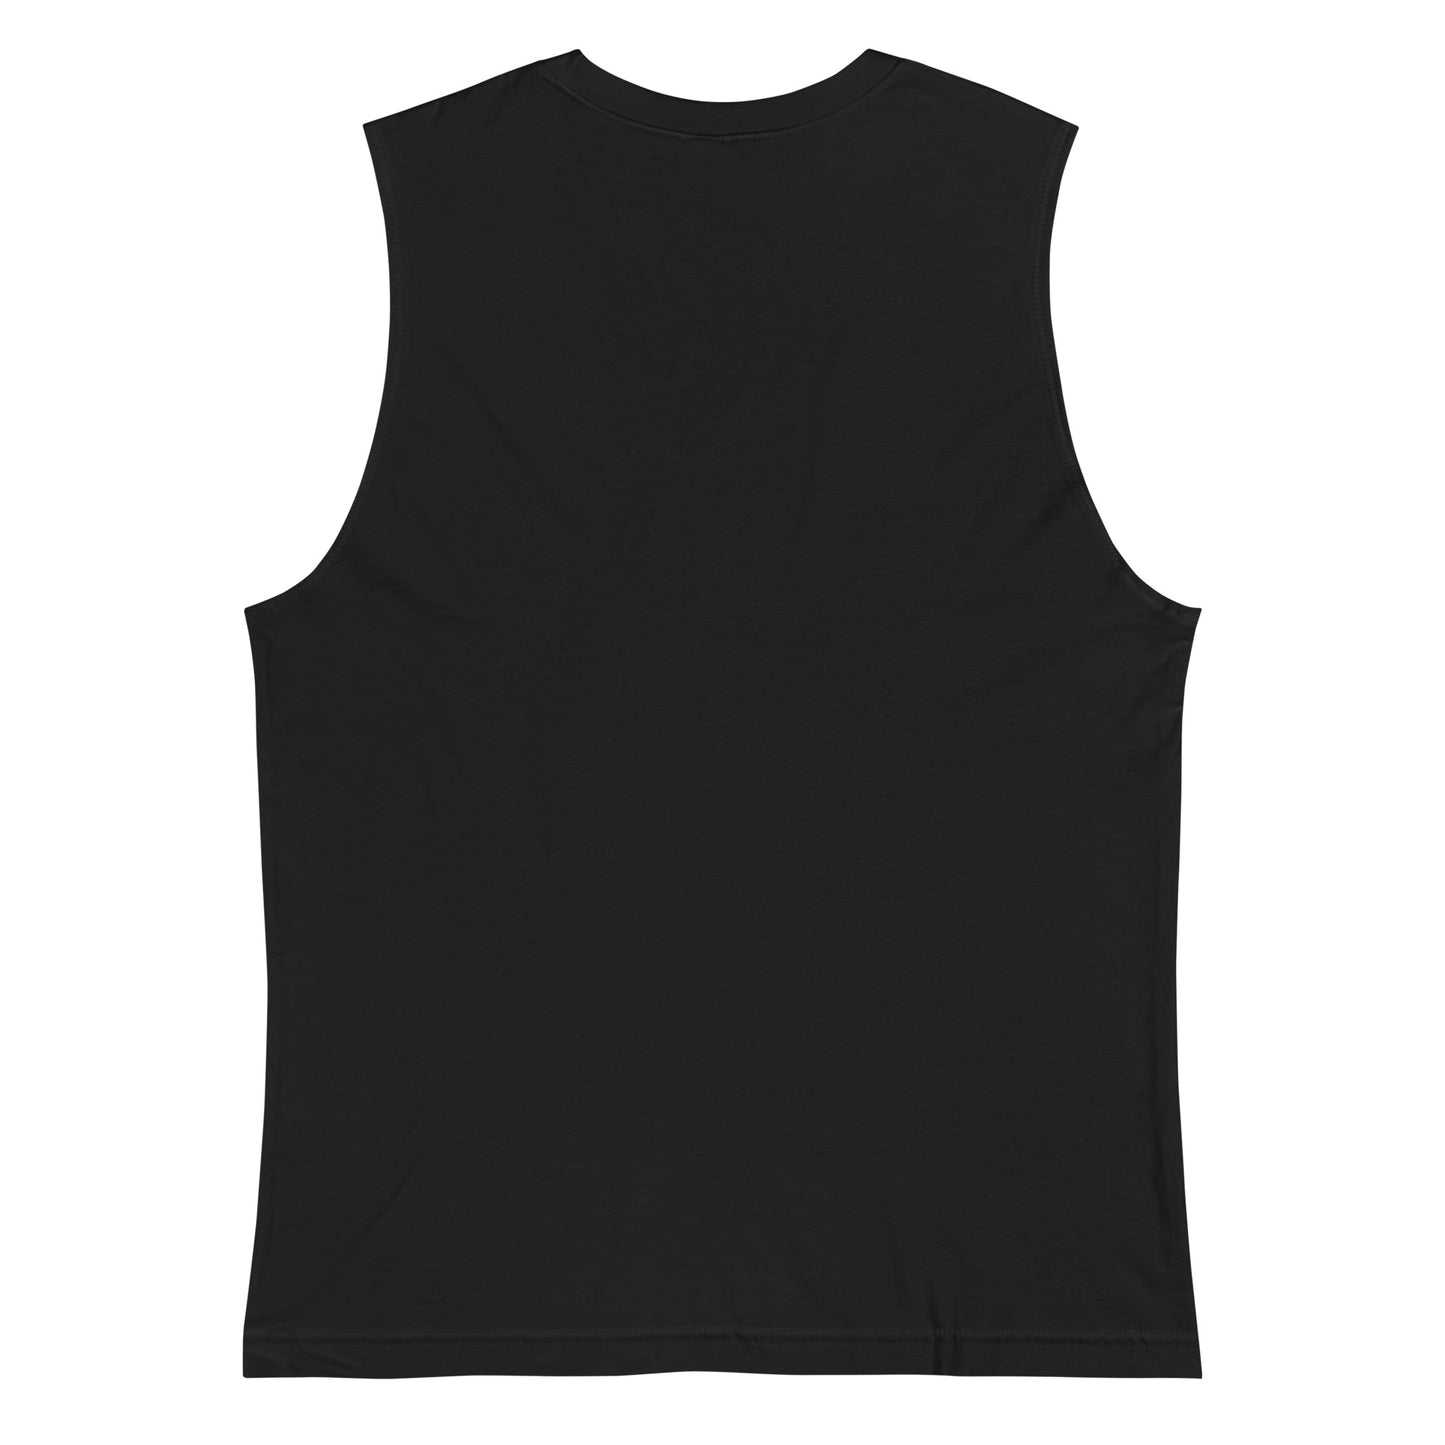 Ride Fast Muscle Shirt